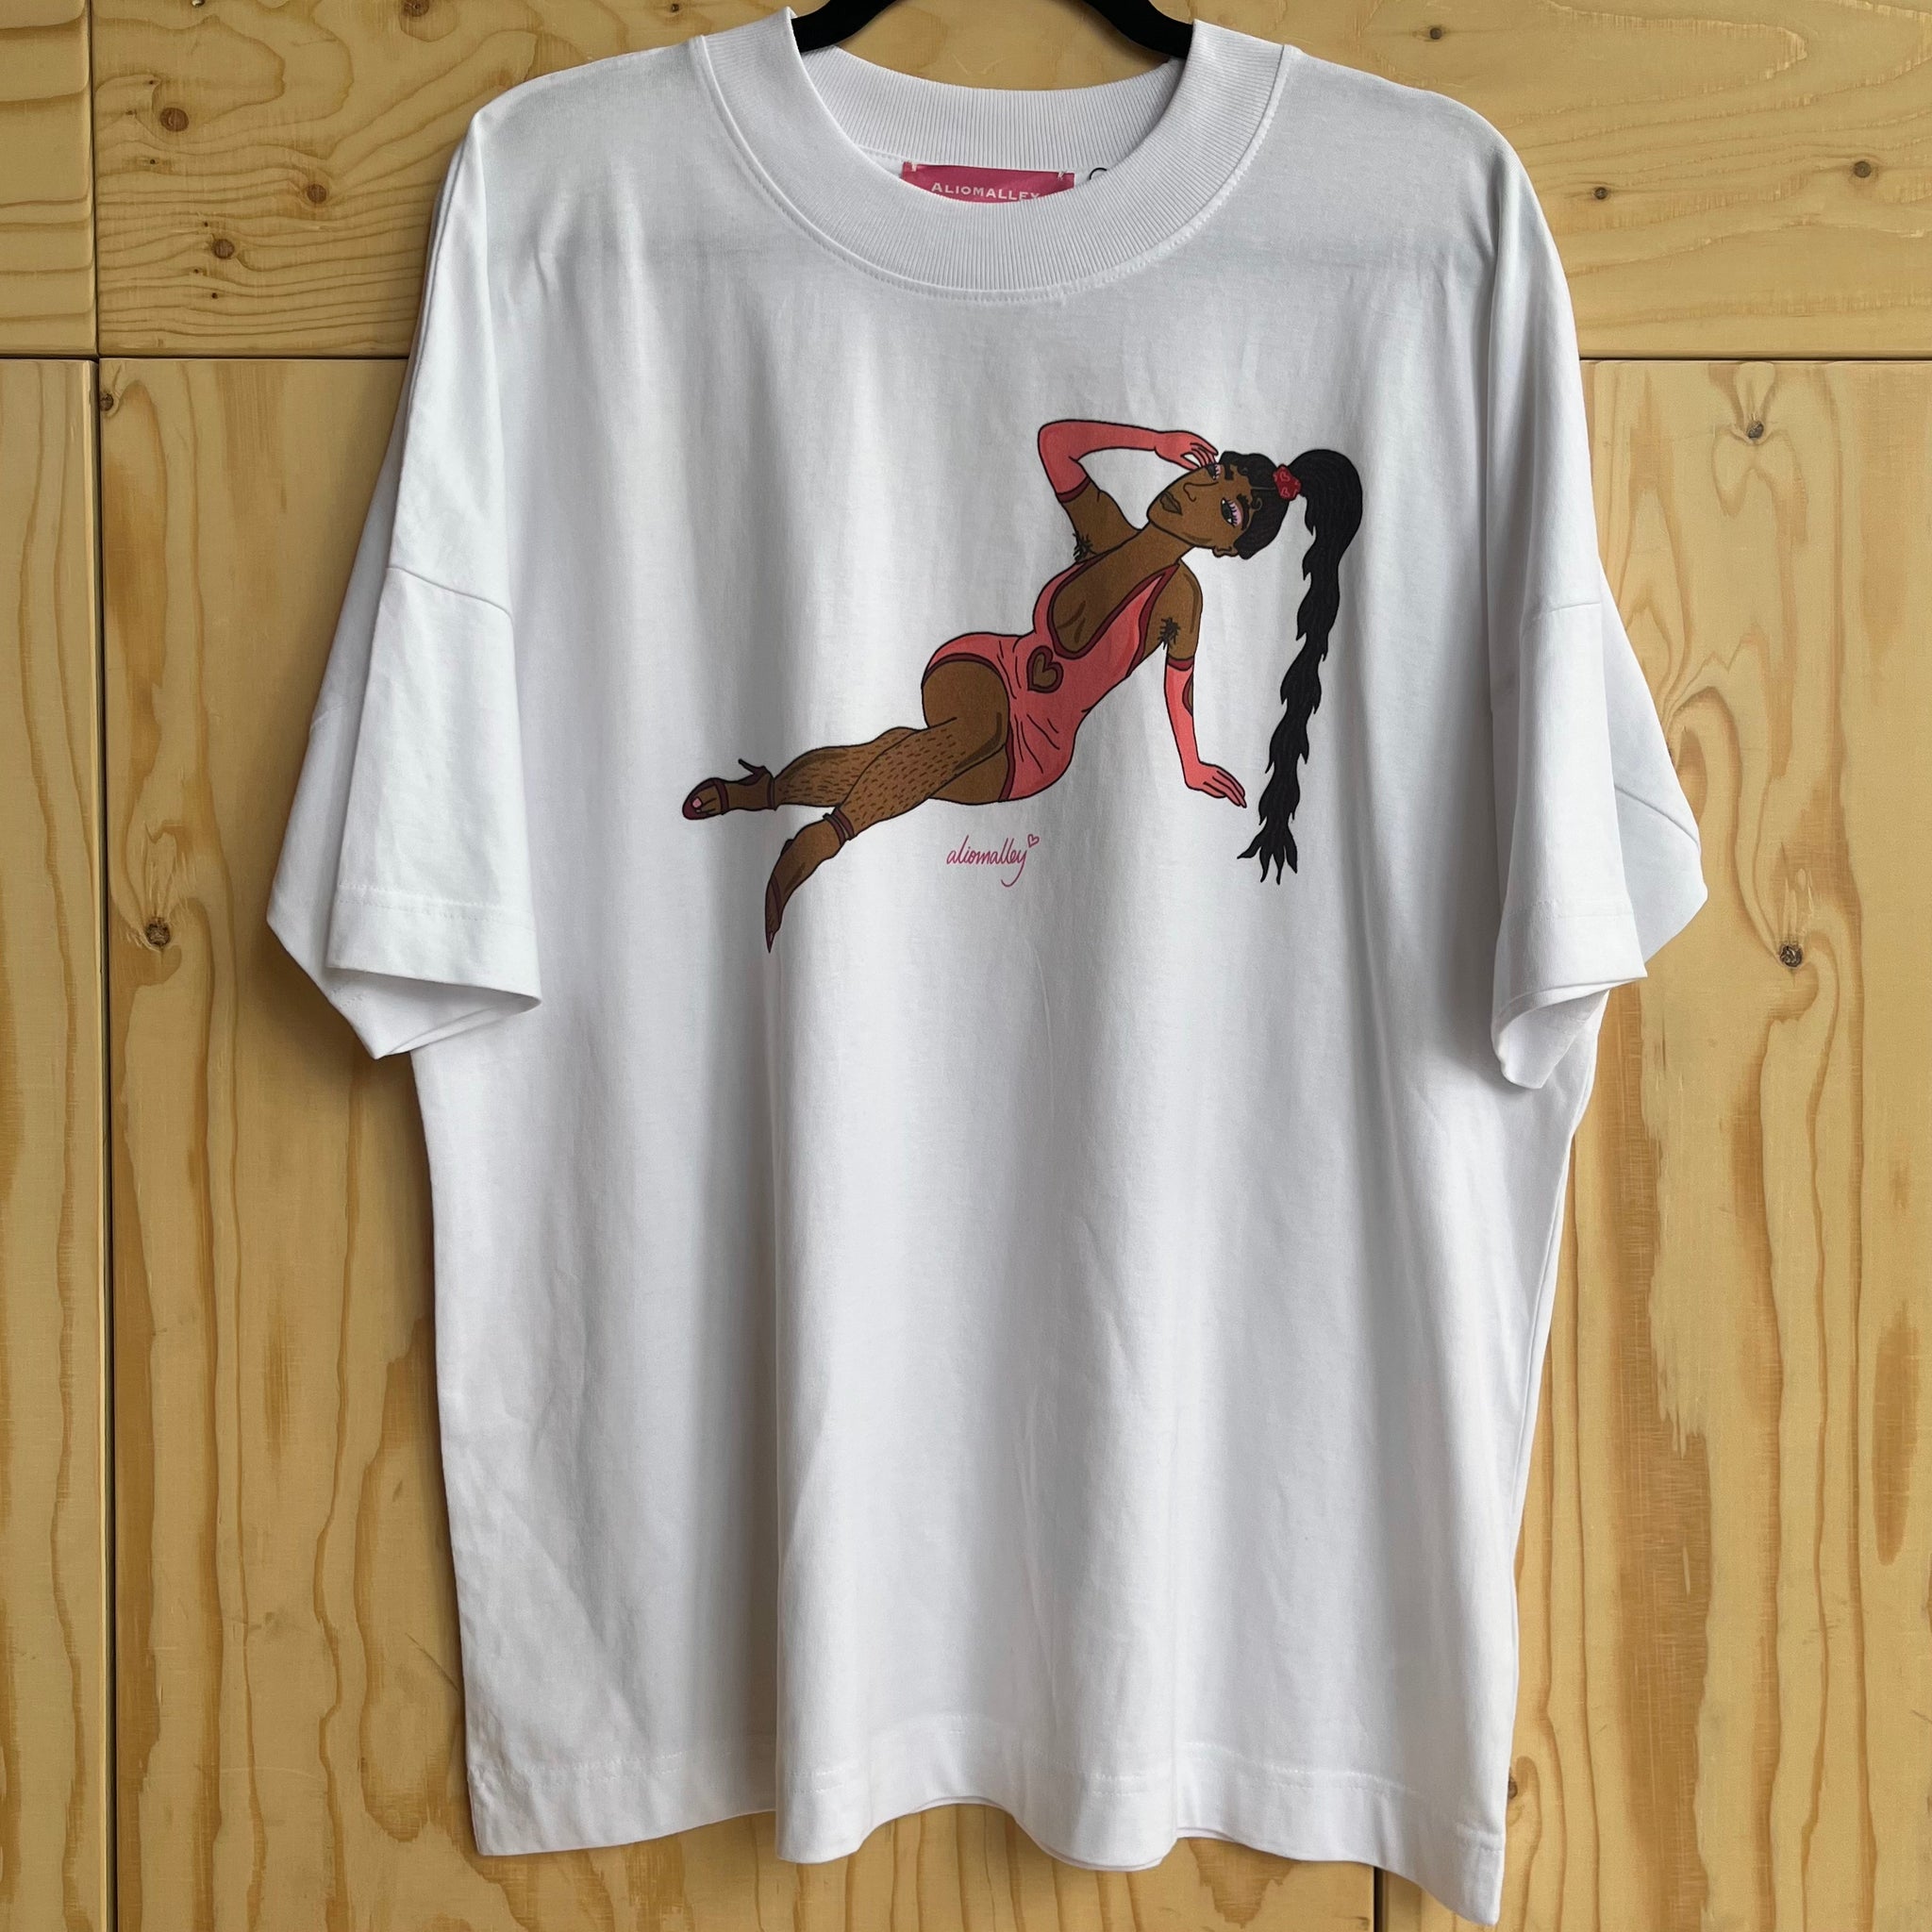 ALIOMALLEY - The Kylie T Shirt